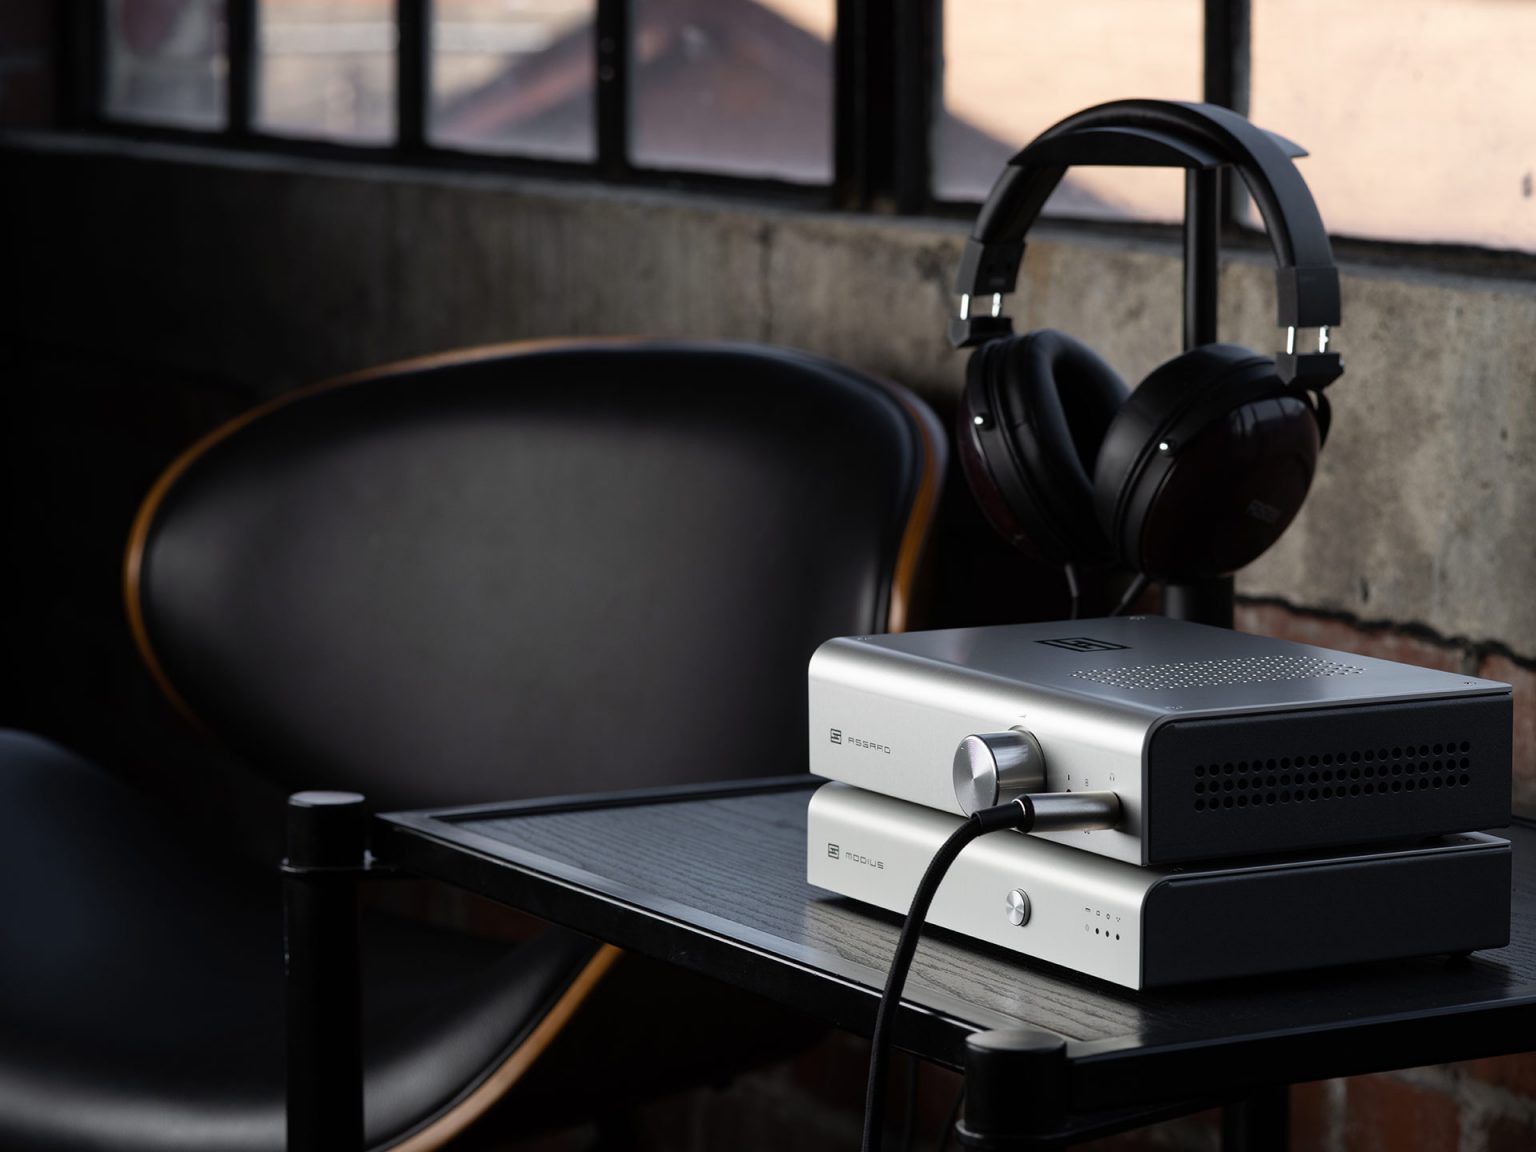 Schiit Announces Modius A Affordable New DAC Just Push Start